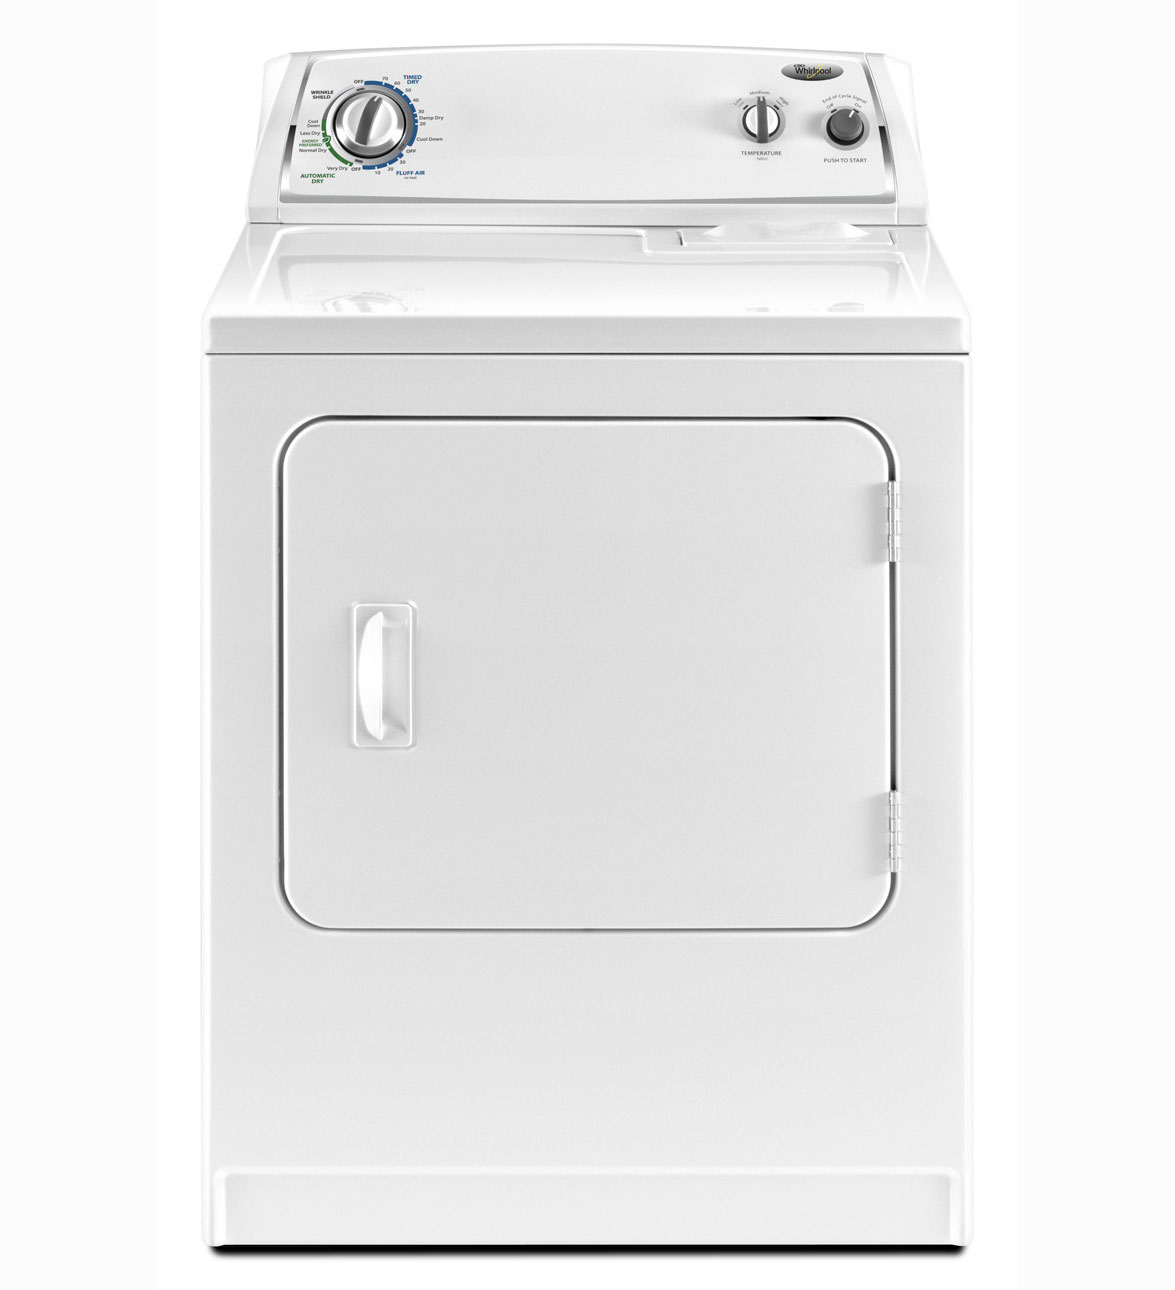 Whirlpool 7 cu ft Electric Dryer (White) (Model: WED4800XQ)